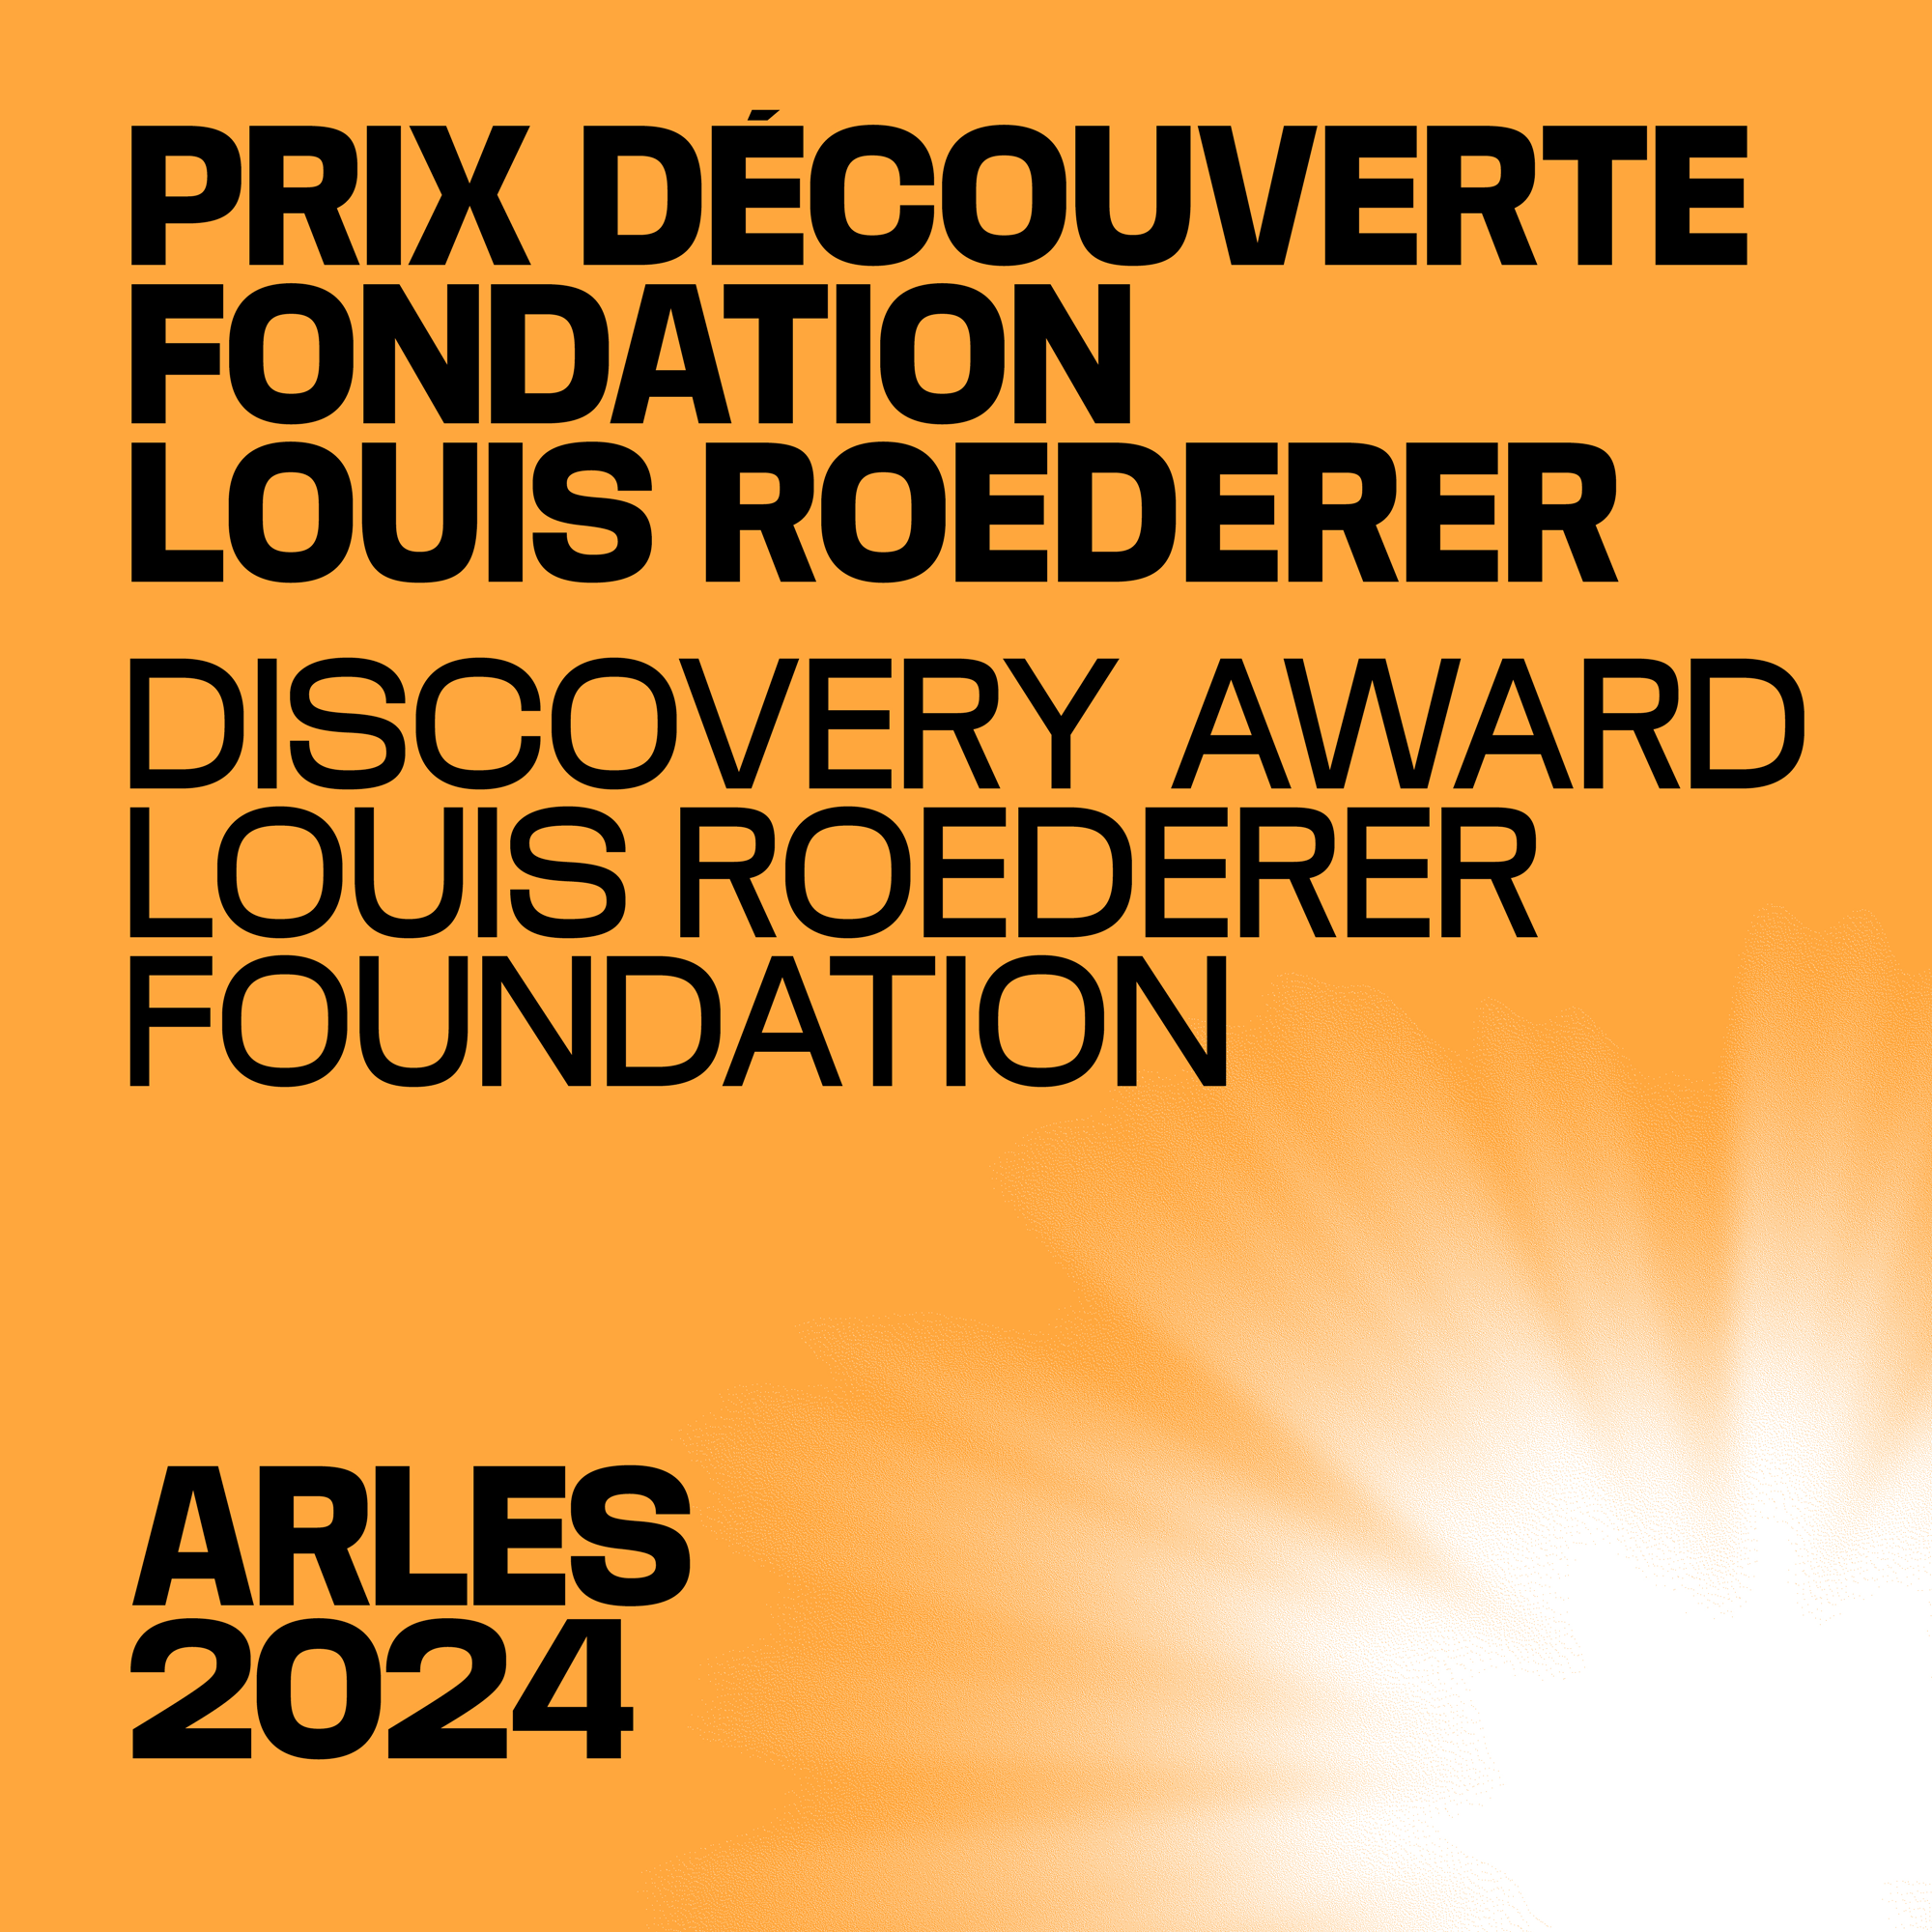 Discovery Award 2024<br>LOUIS ROEDERER FOUNDATION